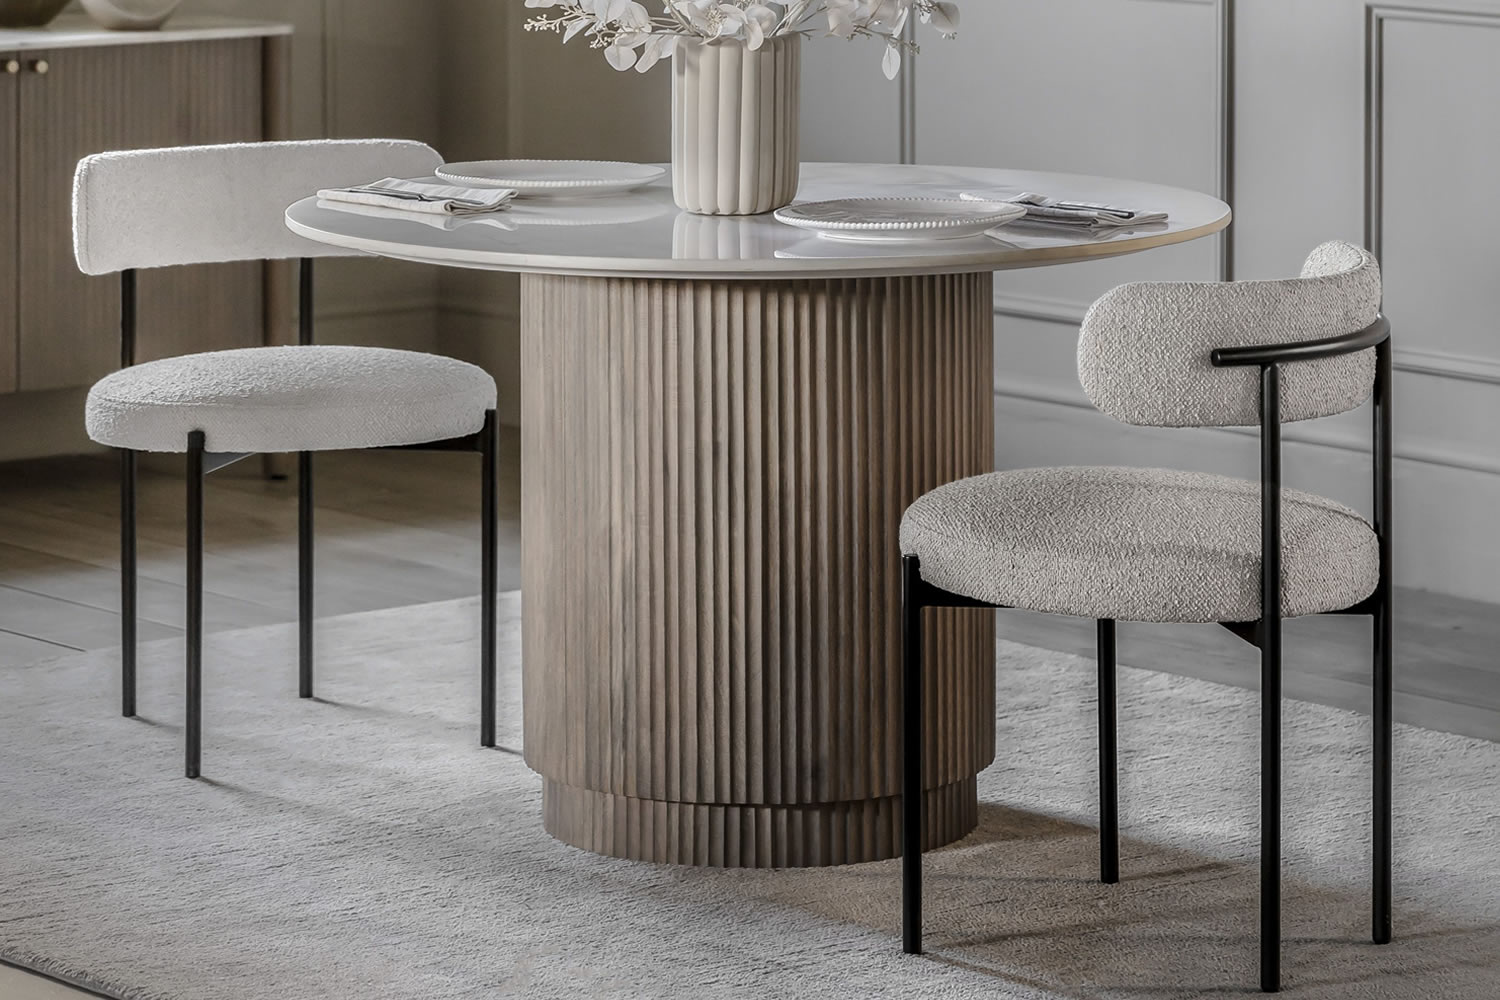 View Marmo Dining table Crafted From Mango Wood Accommodates Up to 4 People GreyVeined White Carrera Marble Top Classy Ribbed Round Cylinder Base information